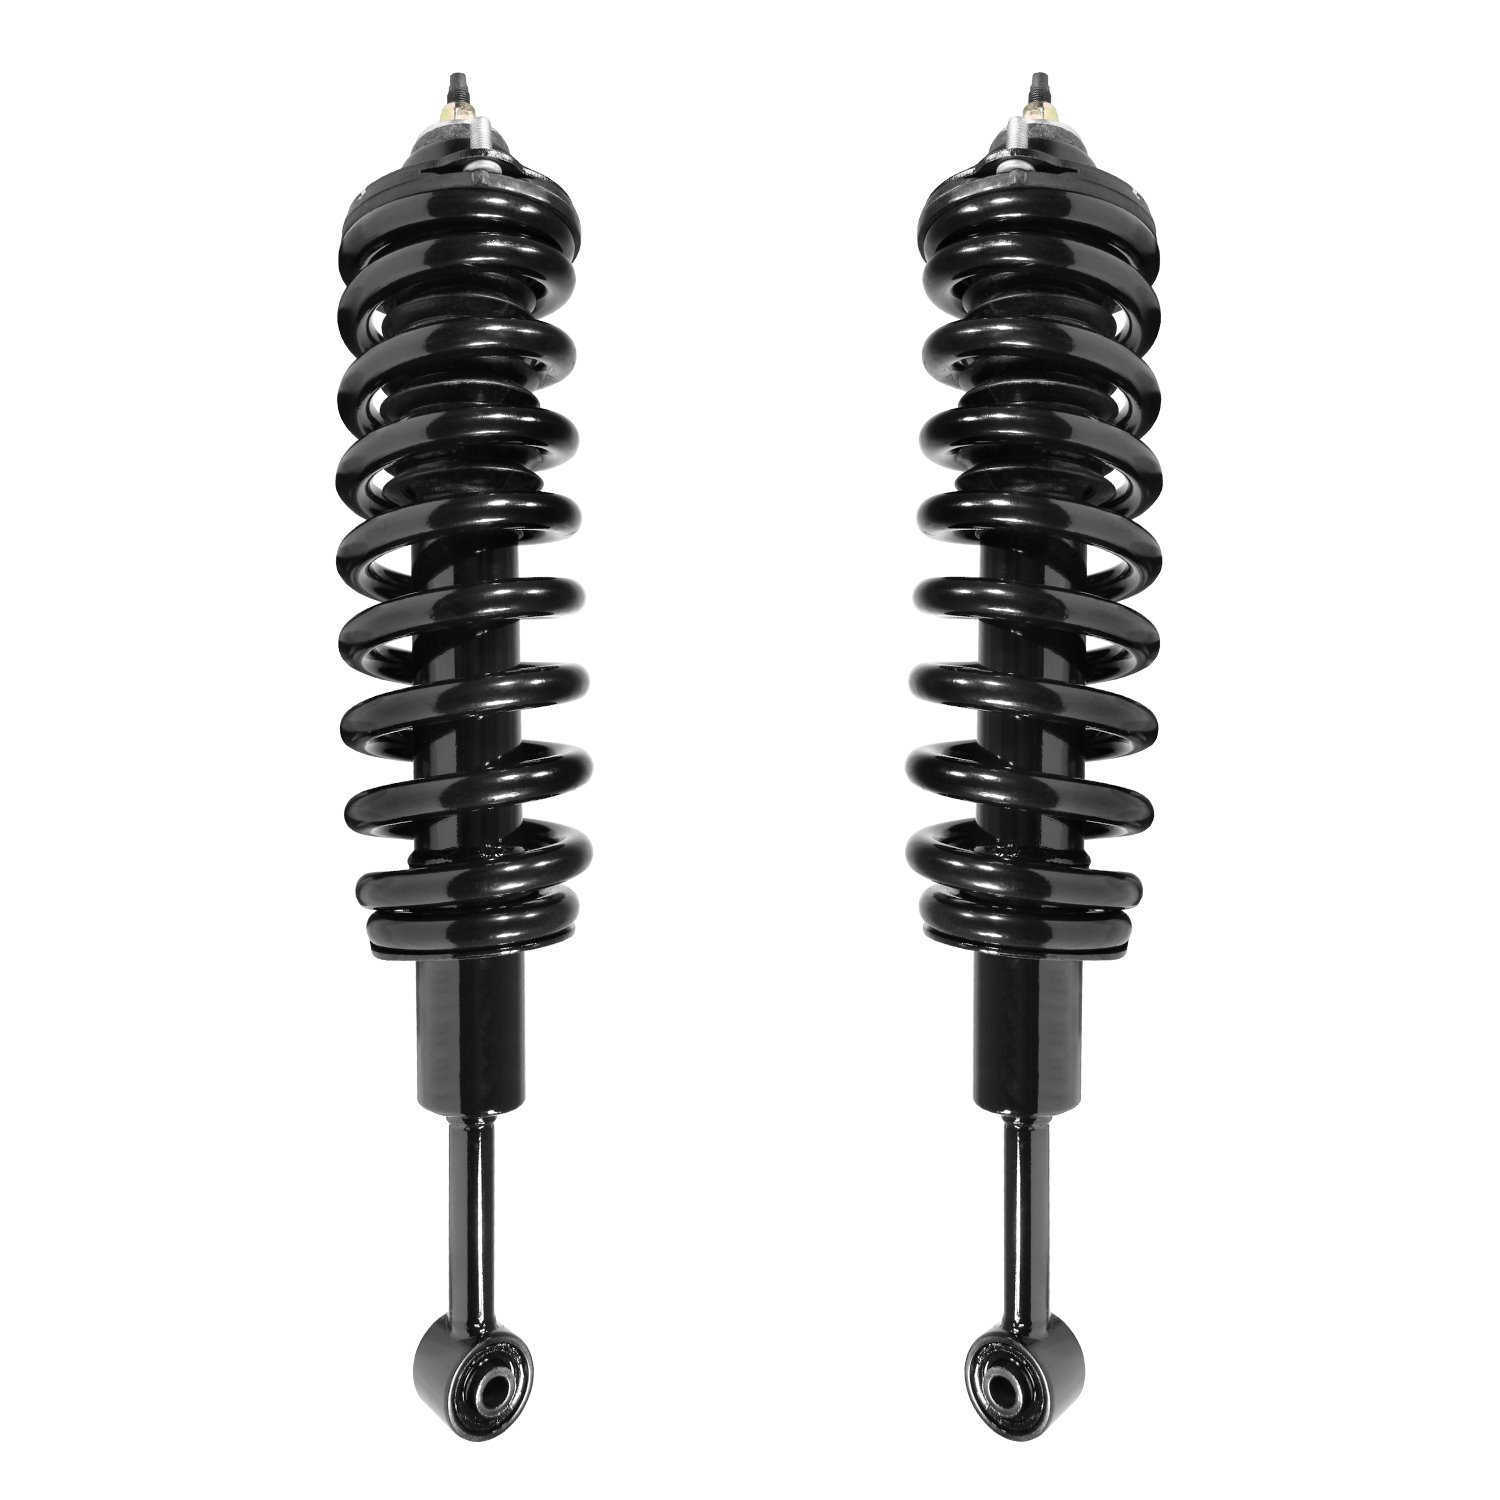 2-11563-11564-001 Suspension Strut & Coil Spring Assembly Set Fits Select Toyota 4Runner, Toyota Tacoma, Toyota FJ Cruiser